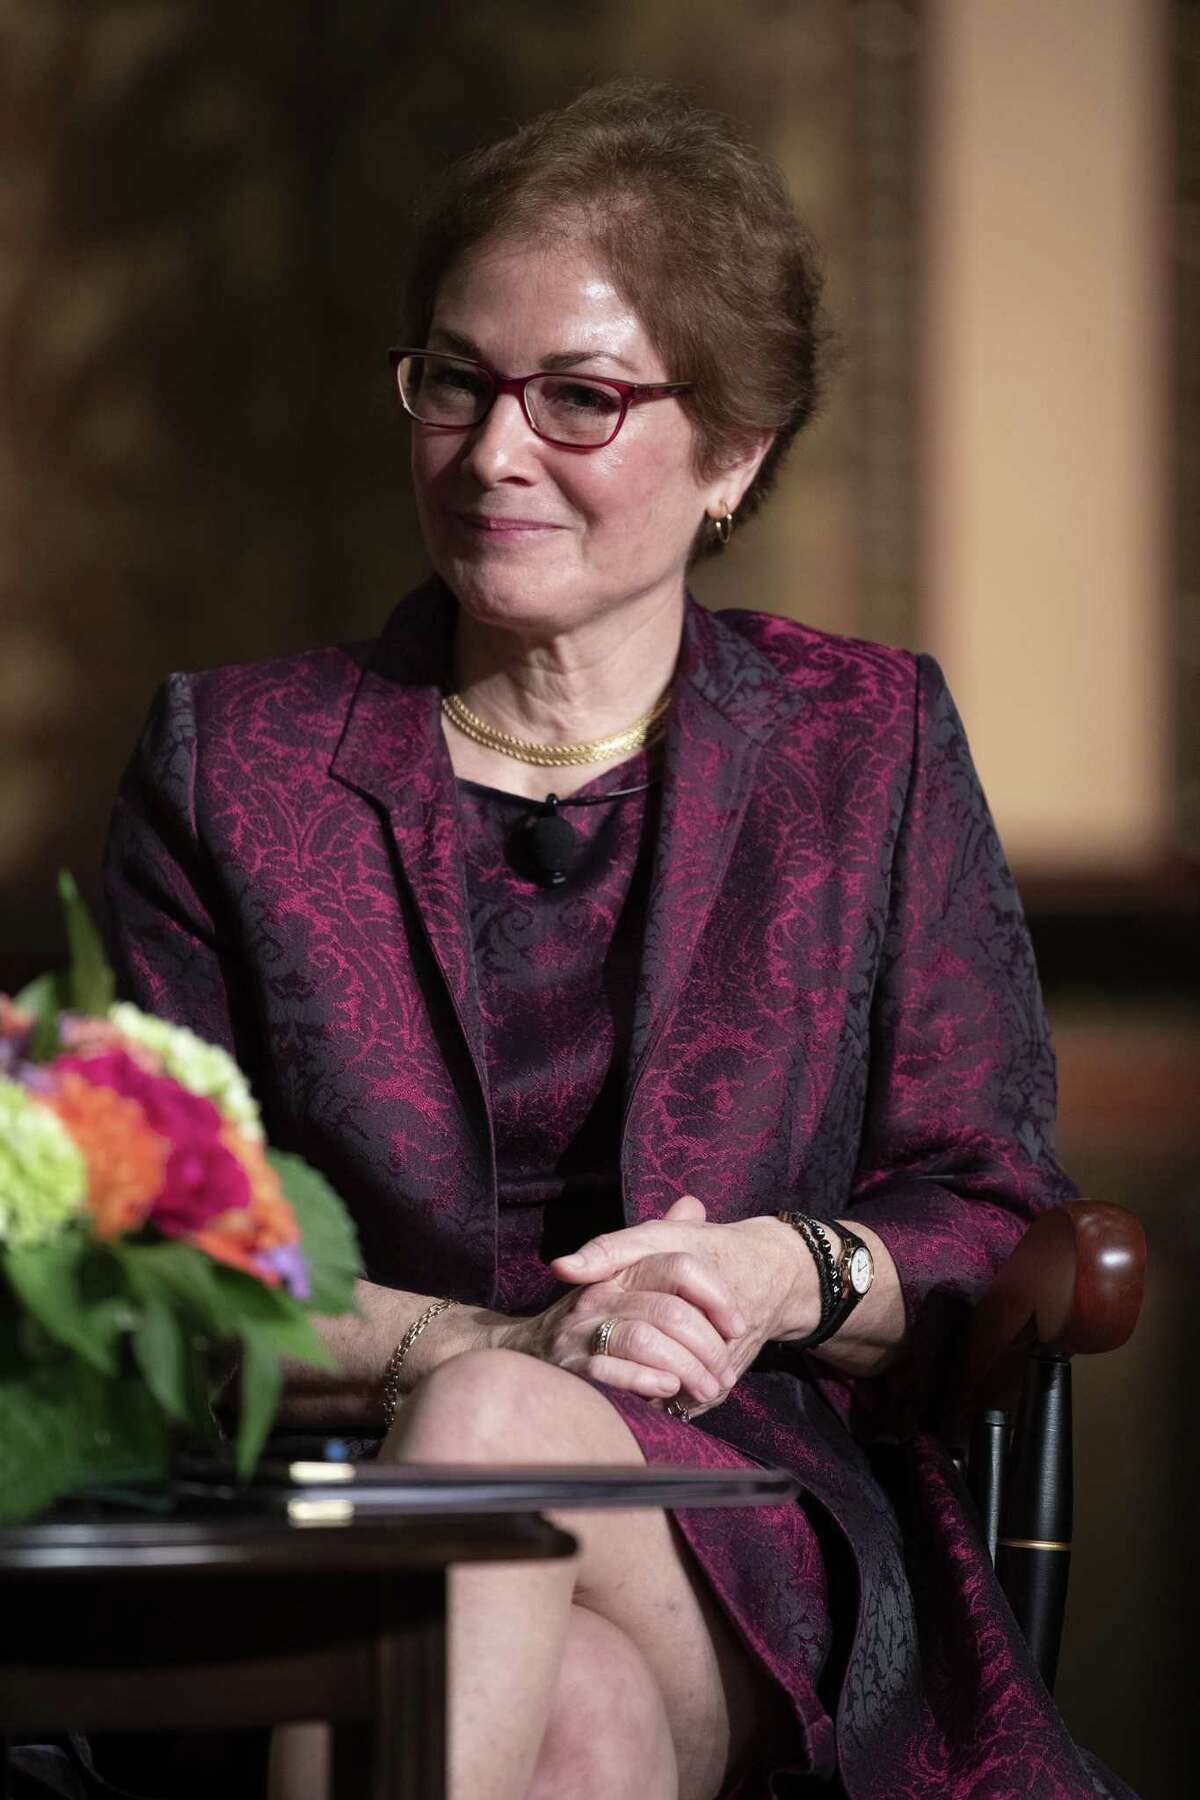 WASHINGTON, DC - FEBRUARY 12: Former U.S. AmbassadorA Marie Yovanovitch attends a ceremony awarding her theA Trainor Award for "Excellence in the Conduct of Diplomacy" at Georgetown University on February 12, 2020 in Washington, DC. Yovanovitch made her first public appearance since testifying before Congress in the impeachment proceedings to accept the 2020 Trainor Award from the Institute for the Study of Diplomacy, an honor previously presented to former Secretary of State Madeleine Albright, then-U.S. Secretary of Energy Ernest Moniz and then-United Nations Secretary General Kofi Annan. (Photo by Tasos Katopodis/Getty Images)